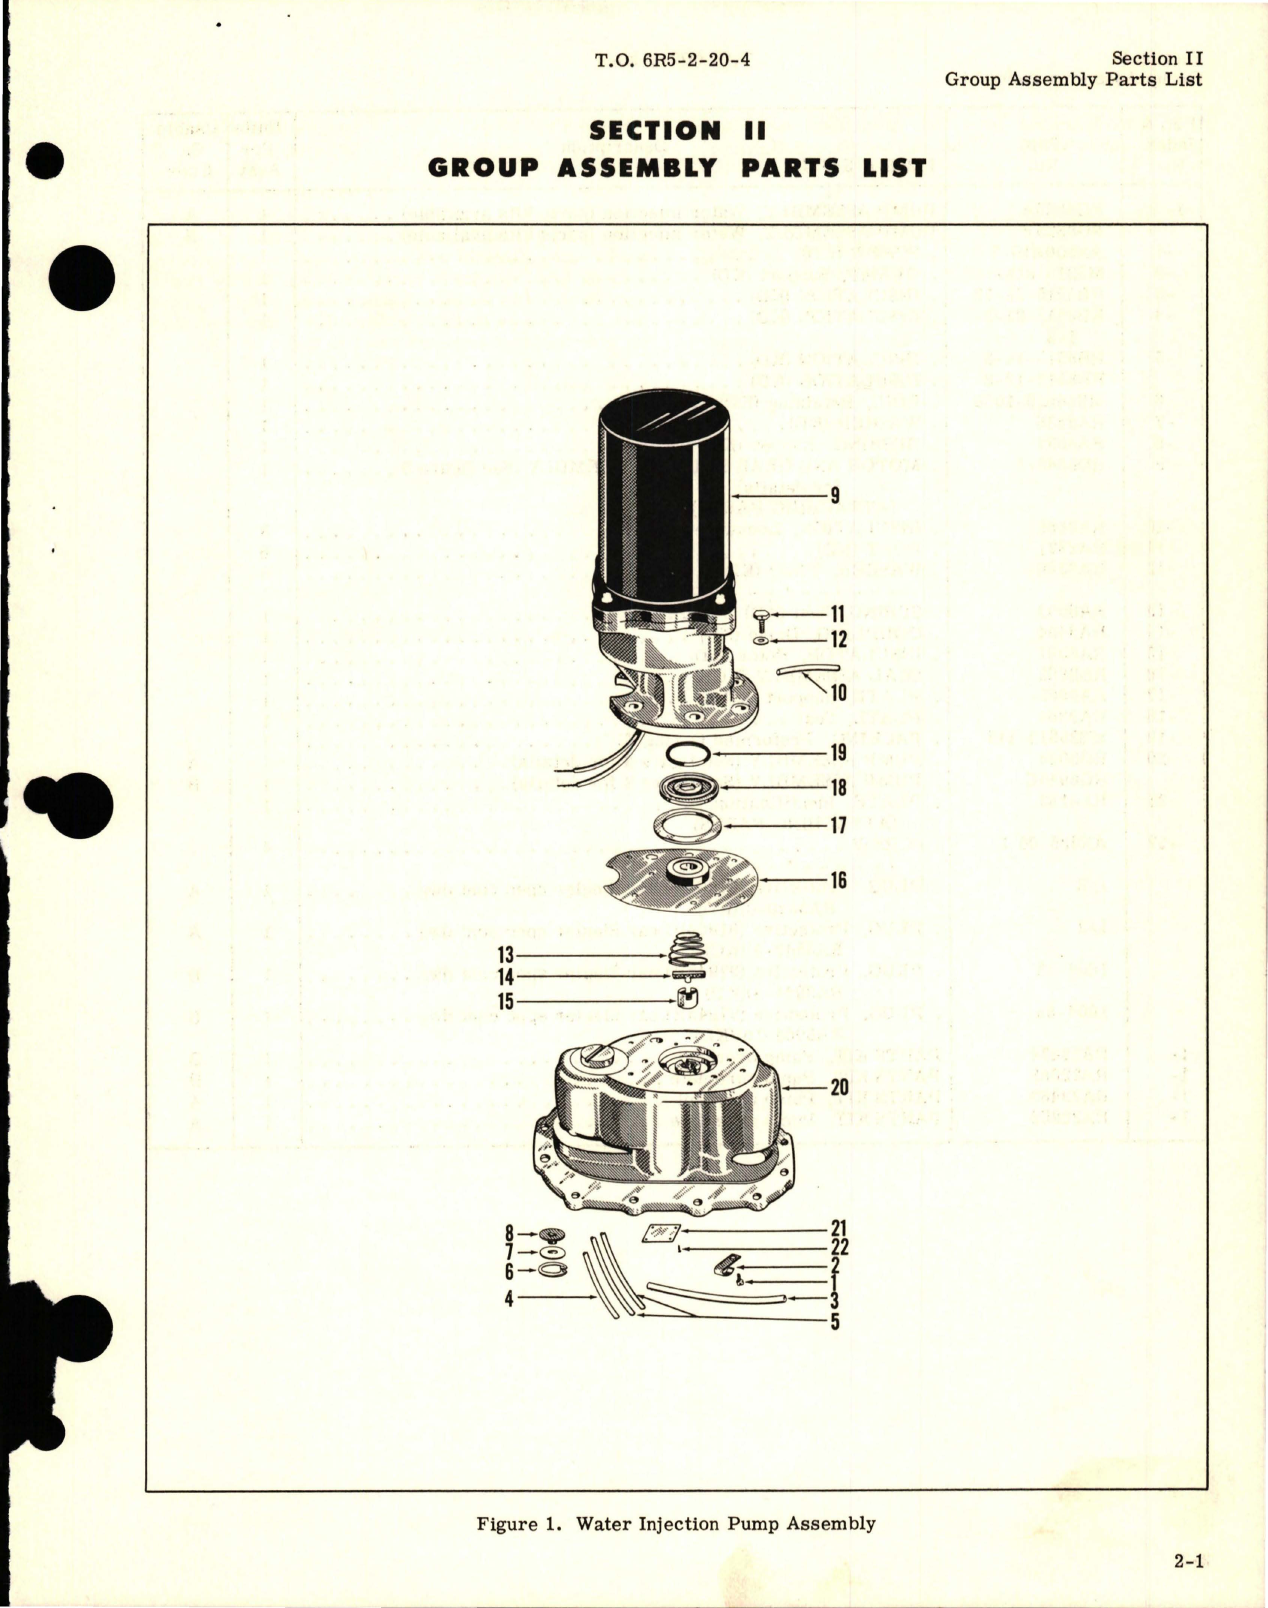 Sample page 7 from AirCorps Library document: Illustrated Parts Breakdown for Power Driven Rotary Pump - Models RG8825F and RG8825A